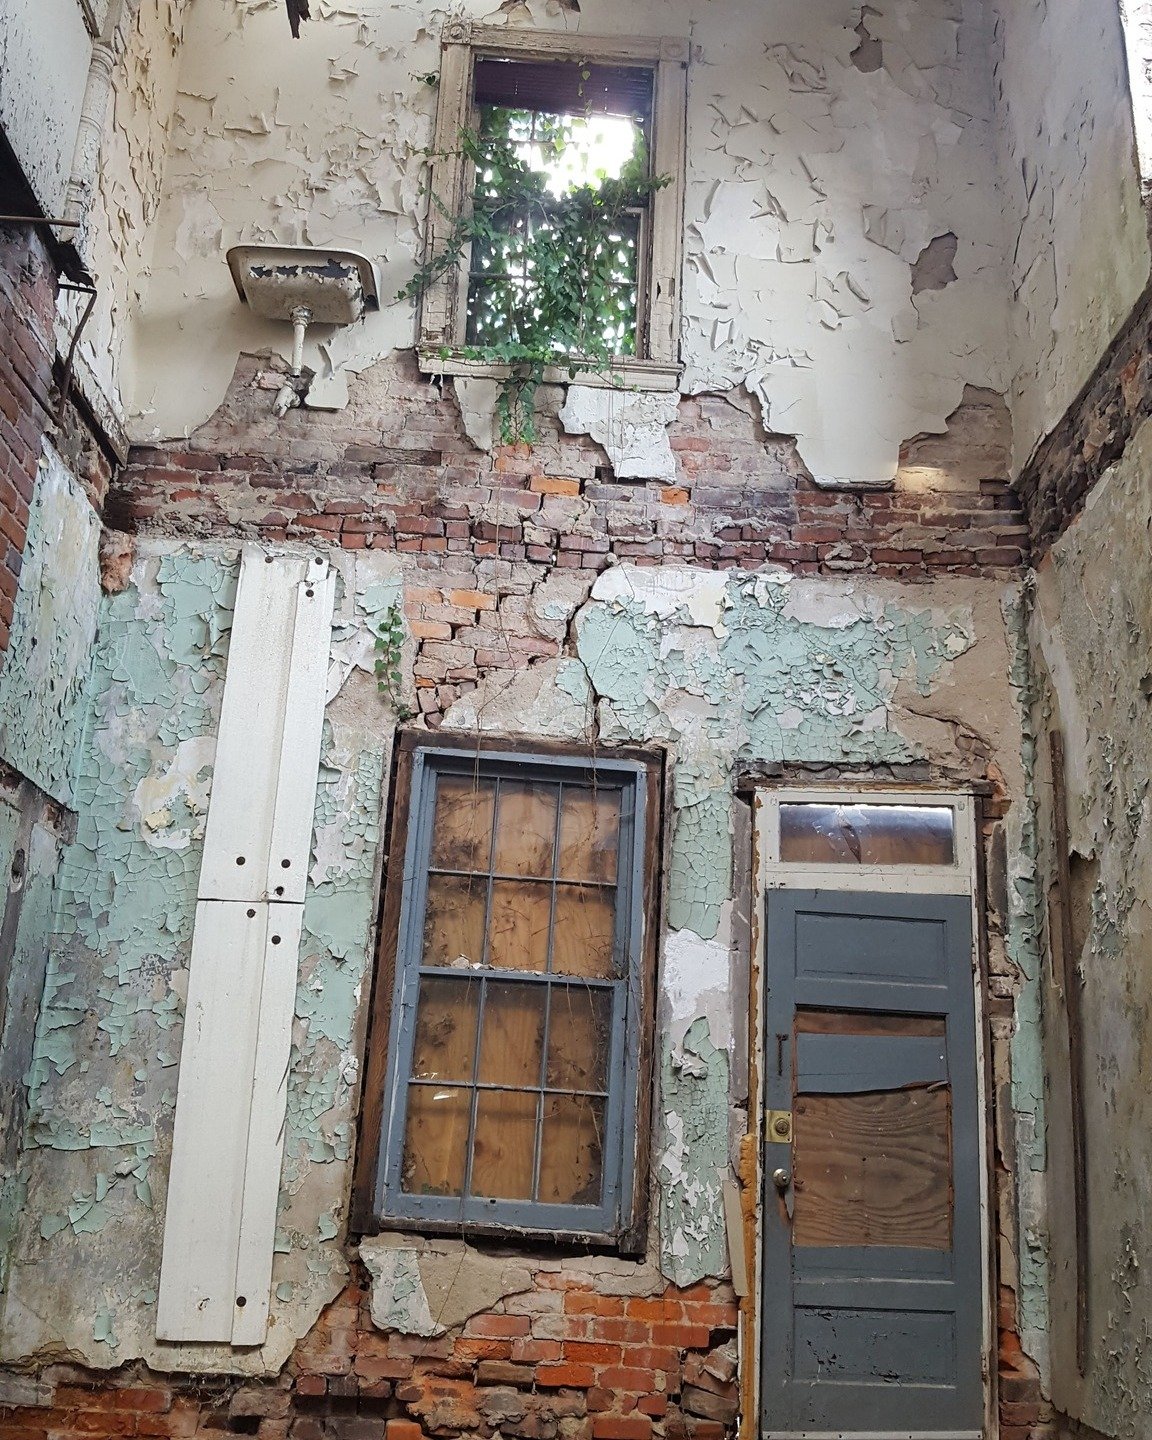 A remarkable look back at a project from 2016. It took heroics to salvage the 1895 Queen Anne row house; the entire roof had collapsed into the lower floors and the rear of the building suffered massive damage. Brick by brick, the rear and side walls